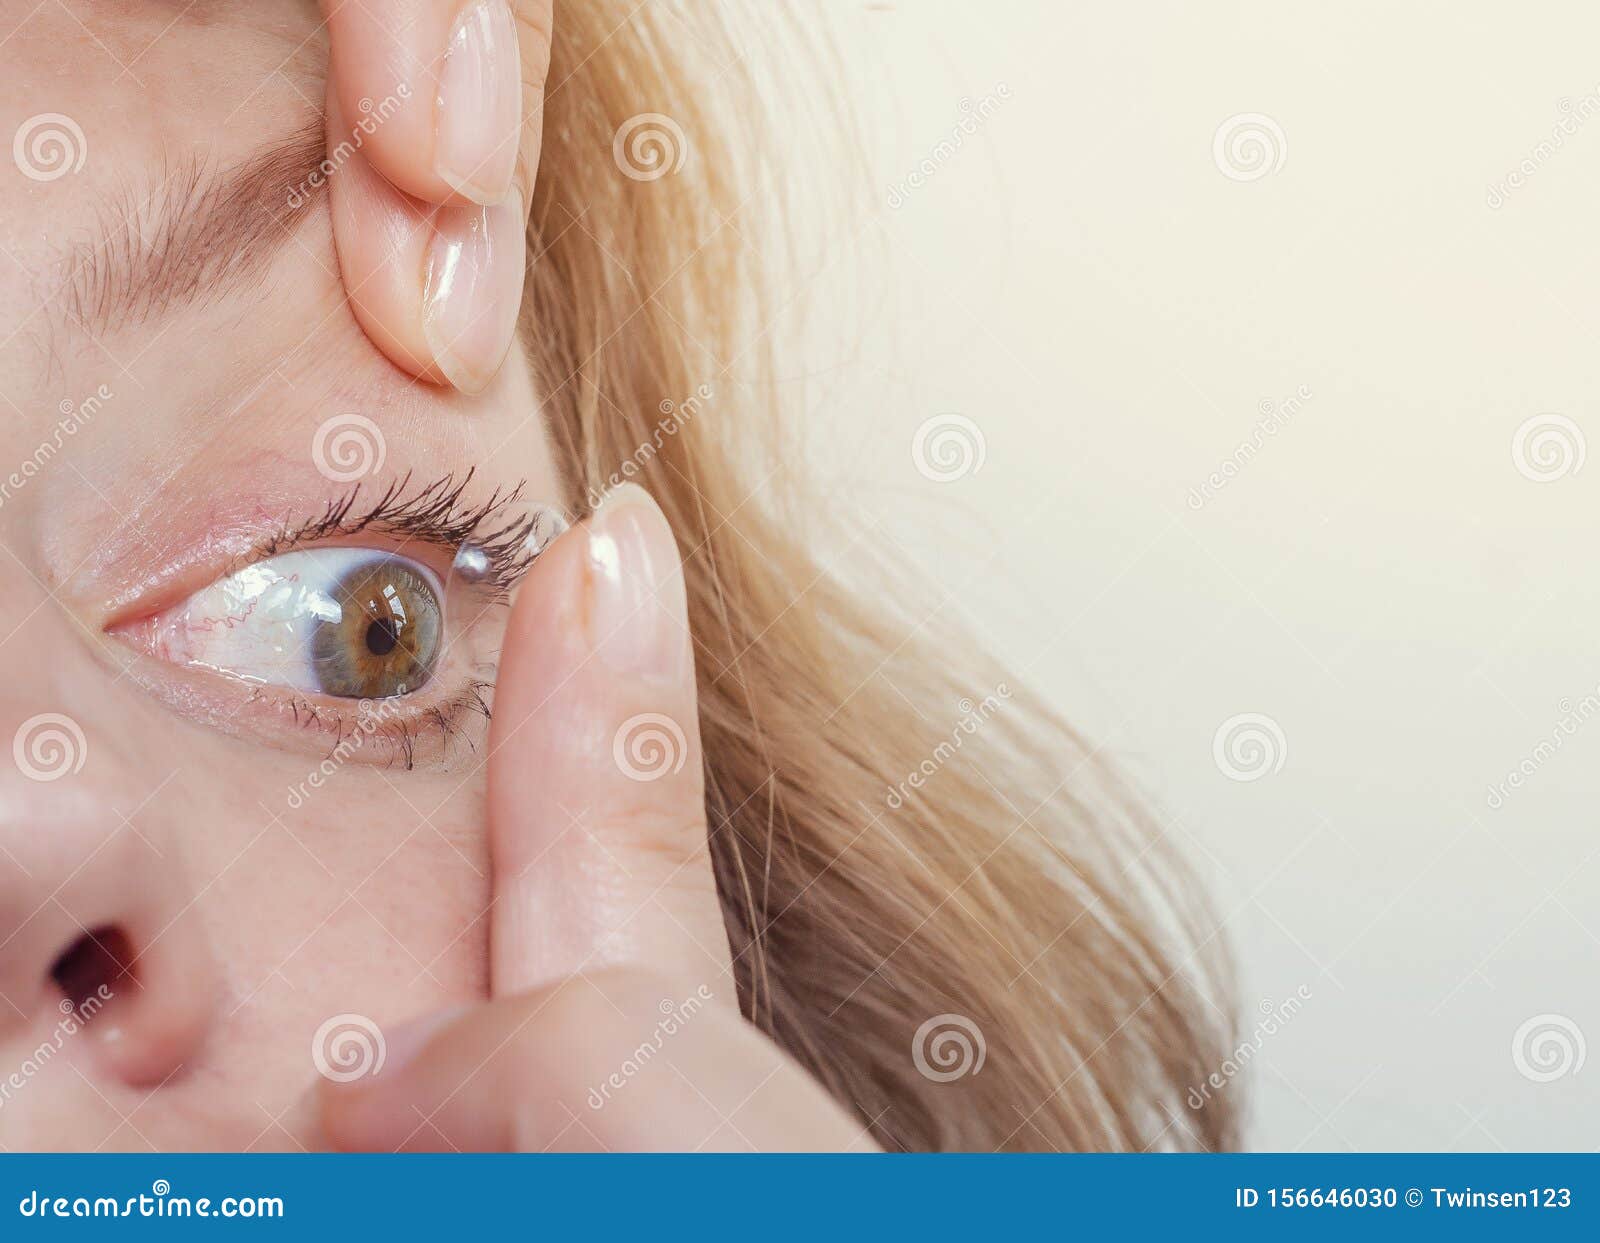 Hoopvol serie Orkaan Woman Inserts a Contact Lens into the Eye. Close-up, Domestic Scene Stock  Photo - Image of healthcare, eyelash: 156646030